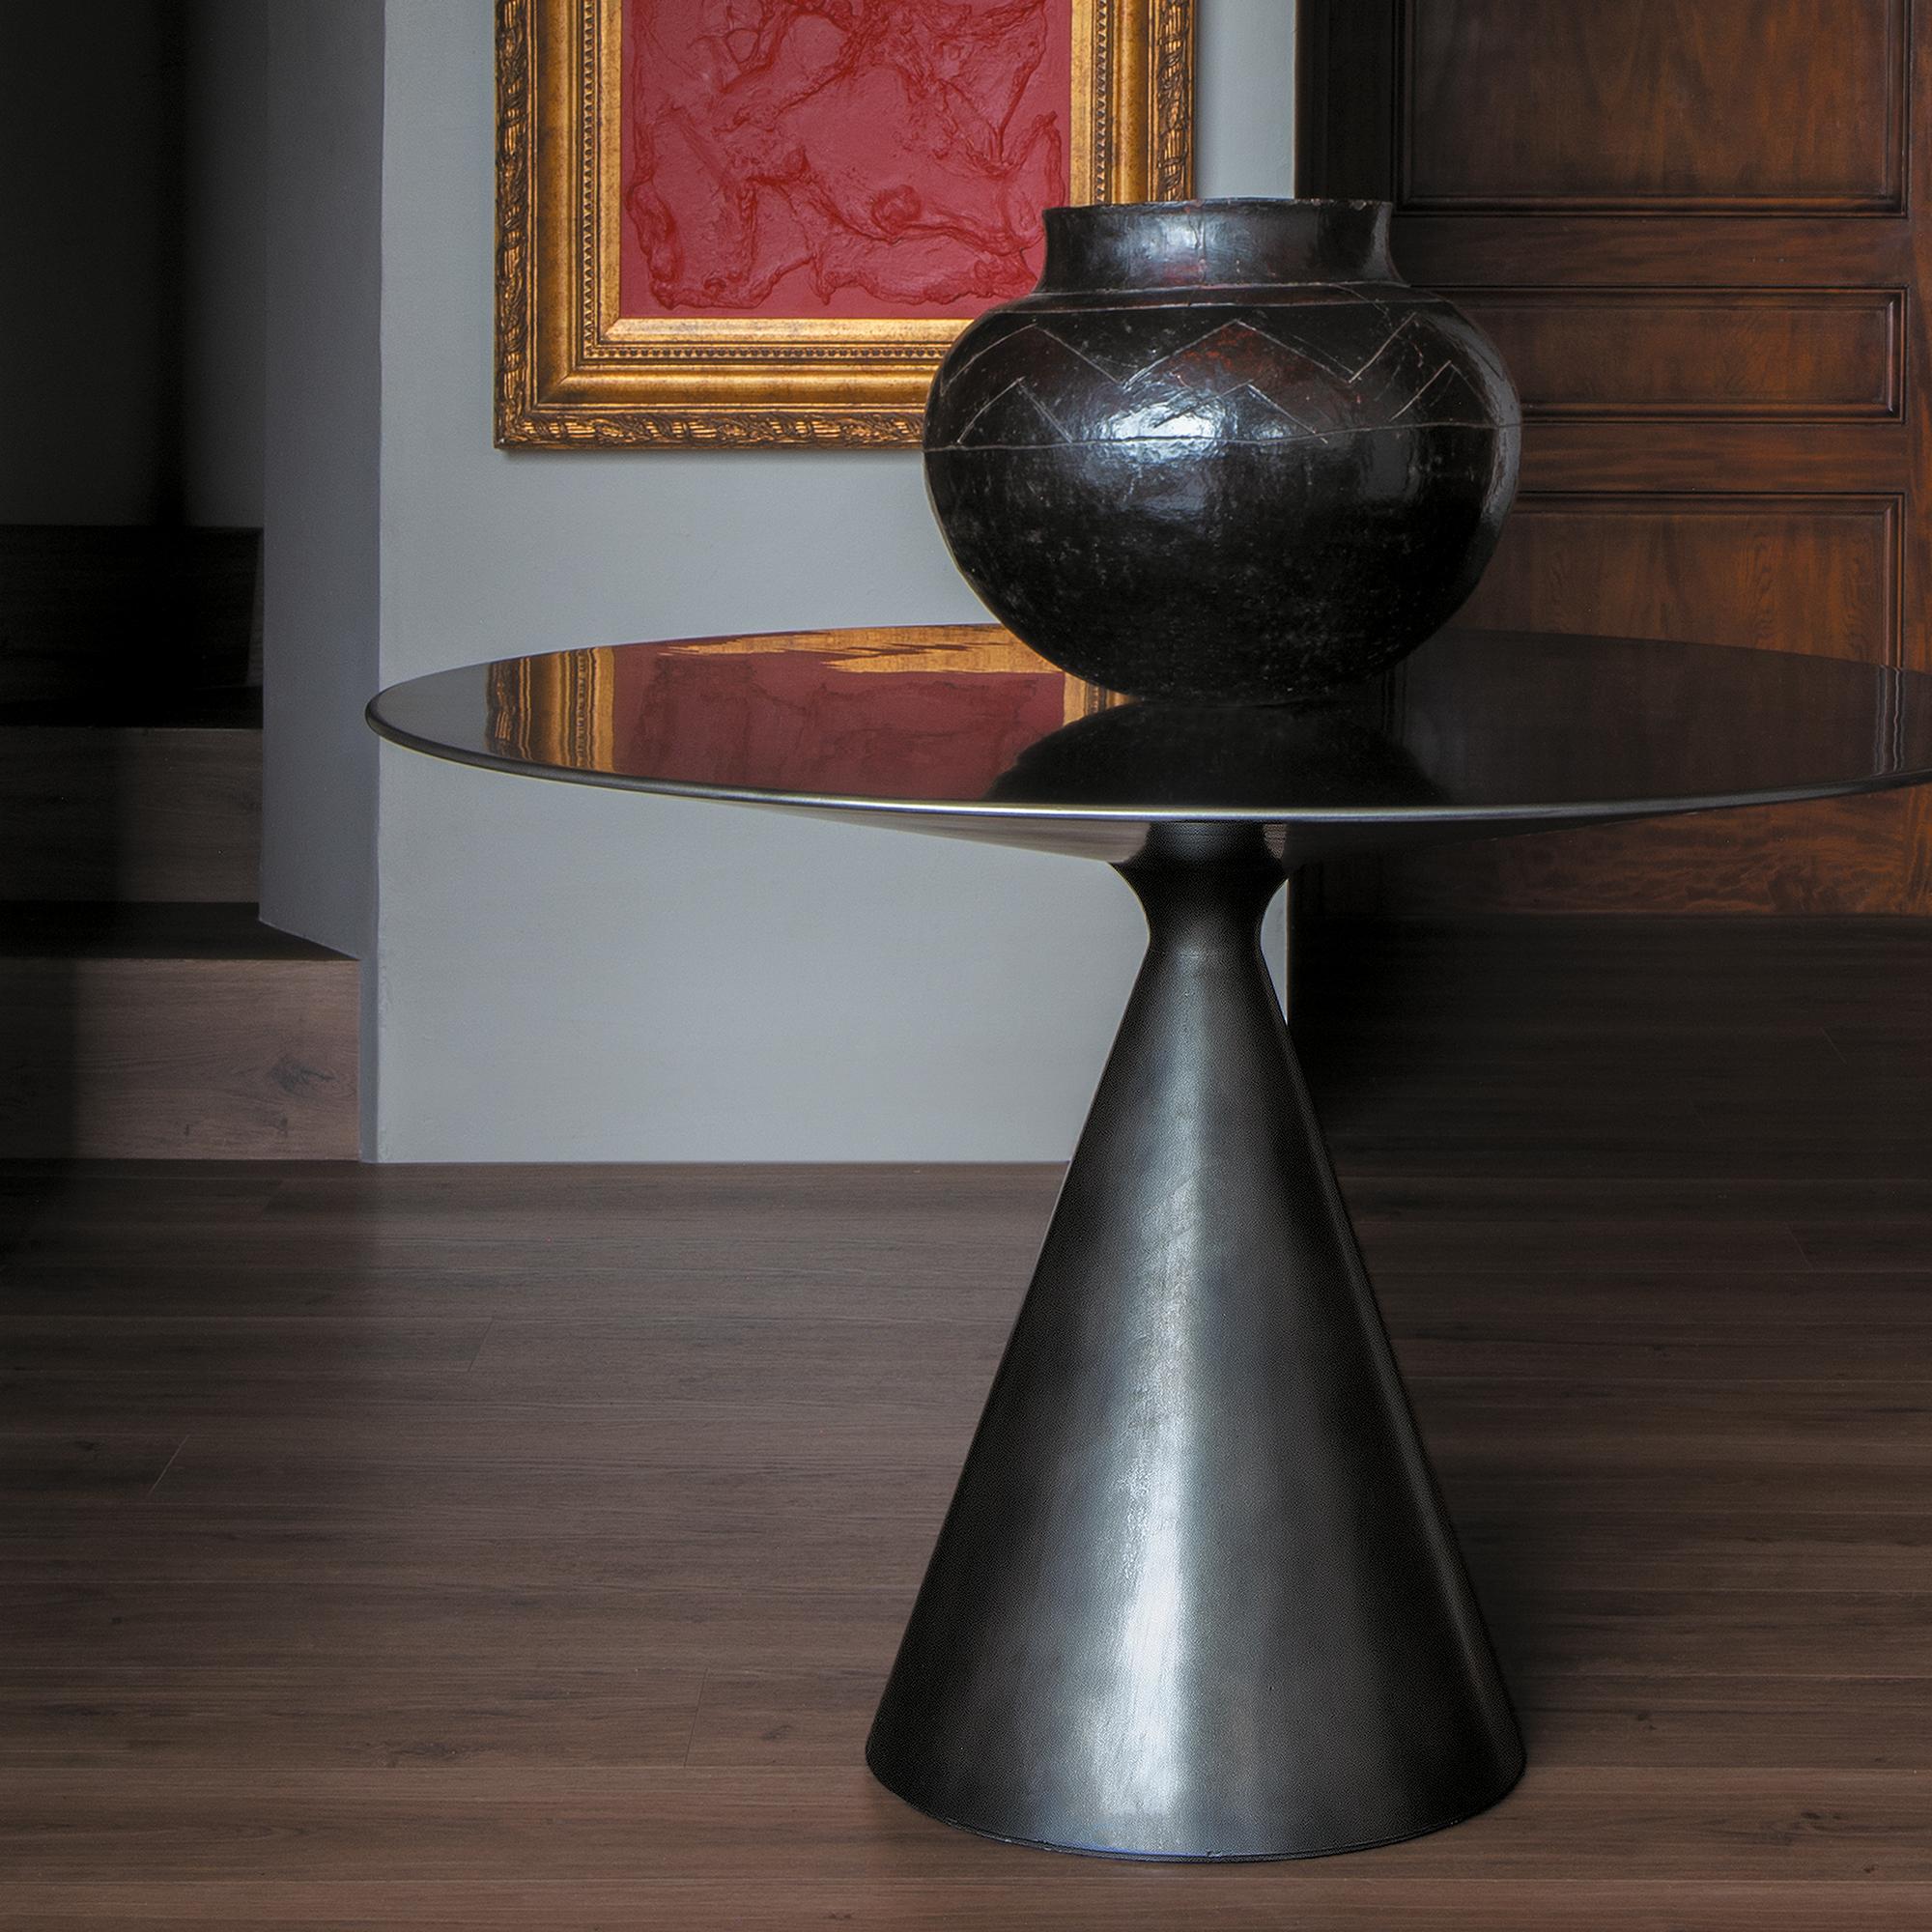 This standout piece is modern yet simple. It has a conical base which joins seamlessly with the sleek cover. The finish looks like polished metal but is completely made of wood. This sophisticated and versatile piece can be placed in many different